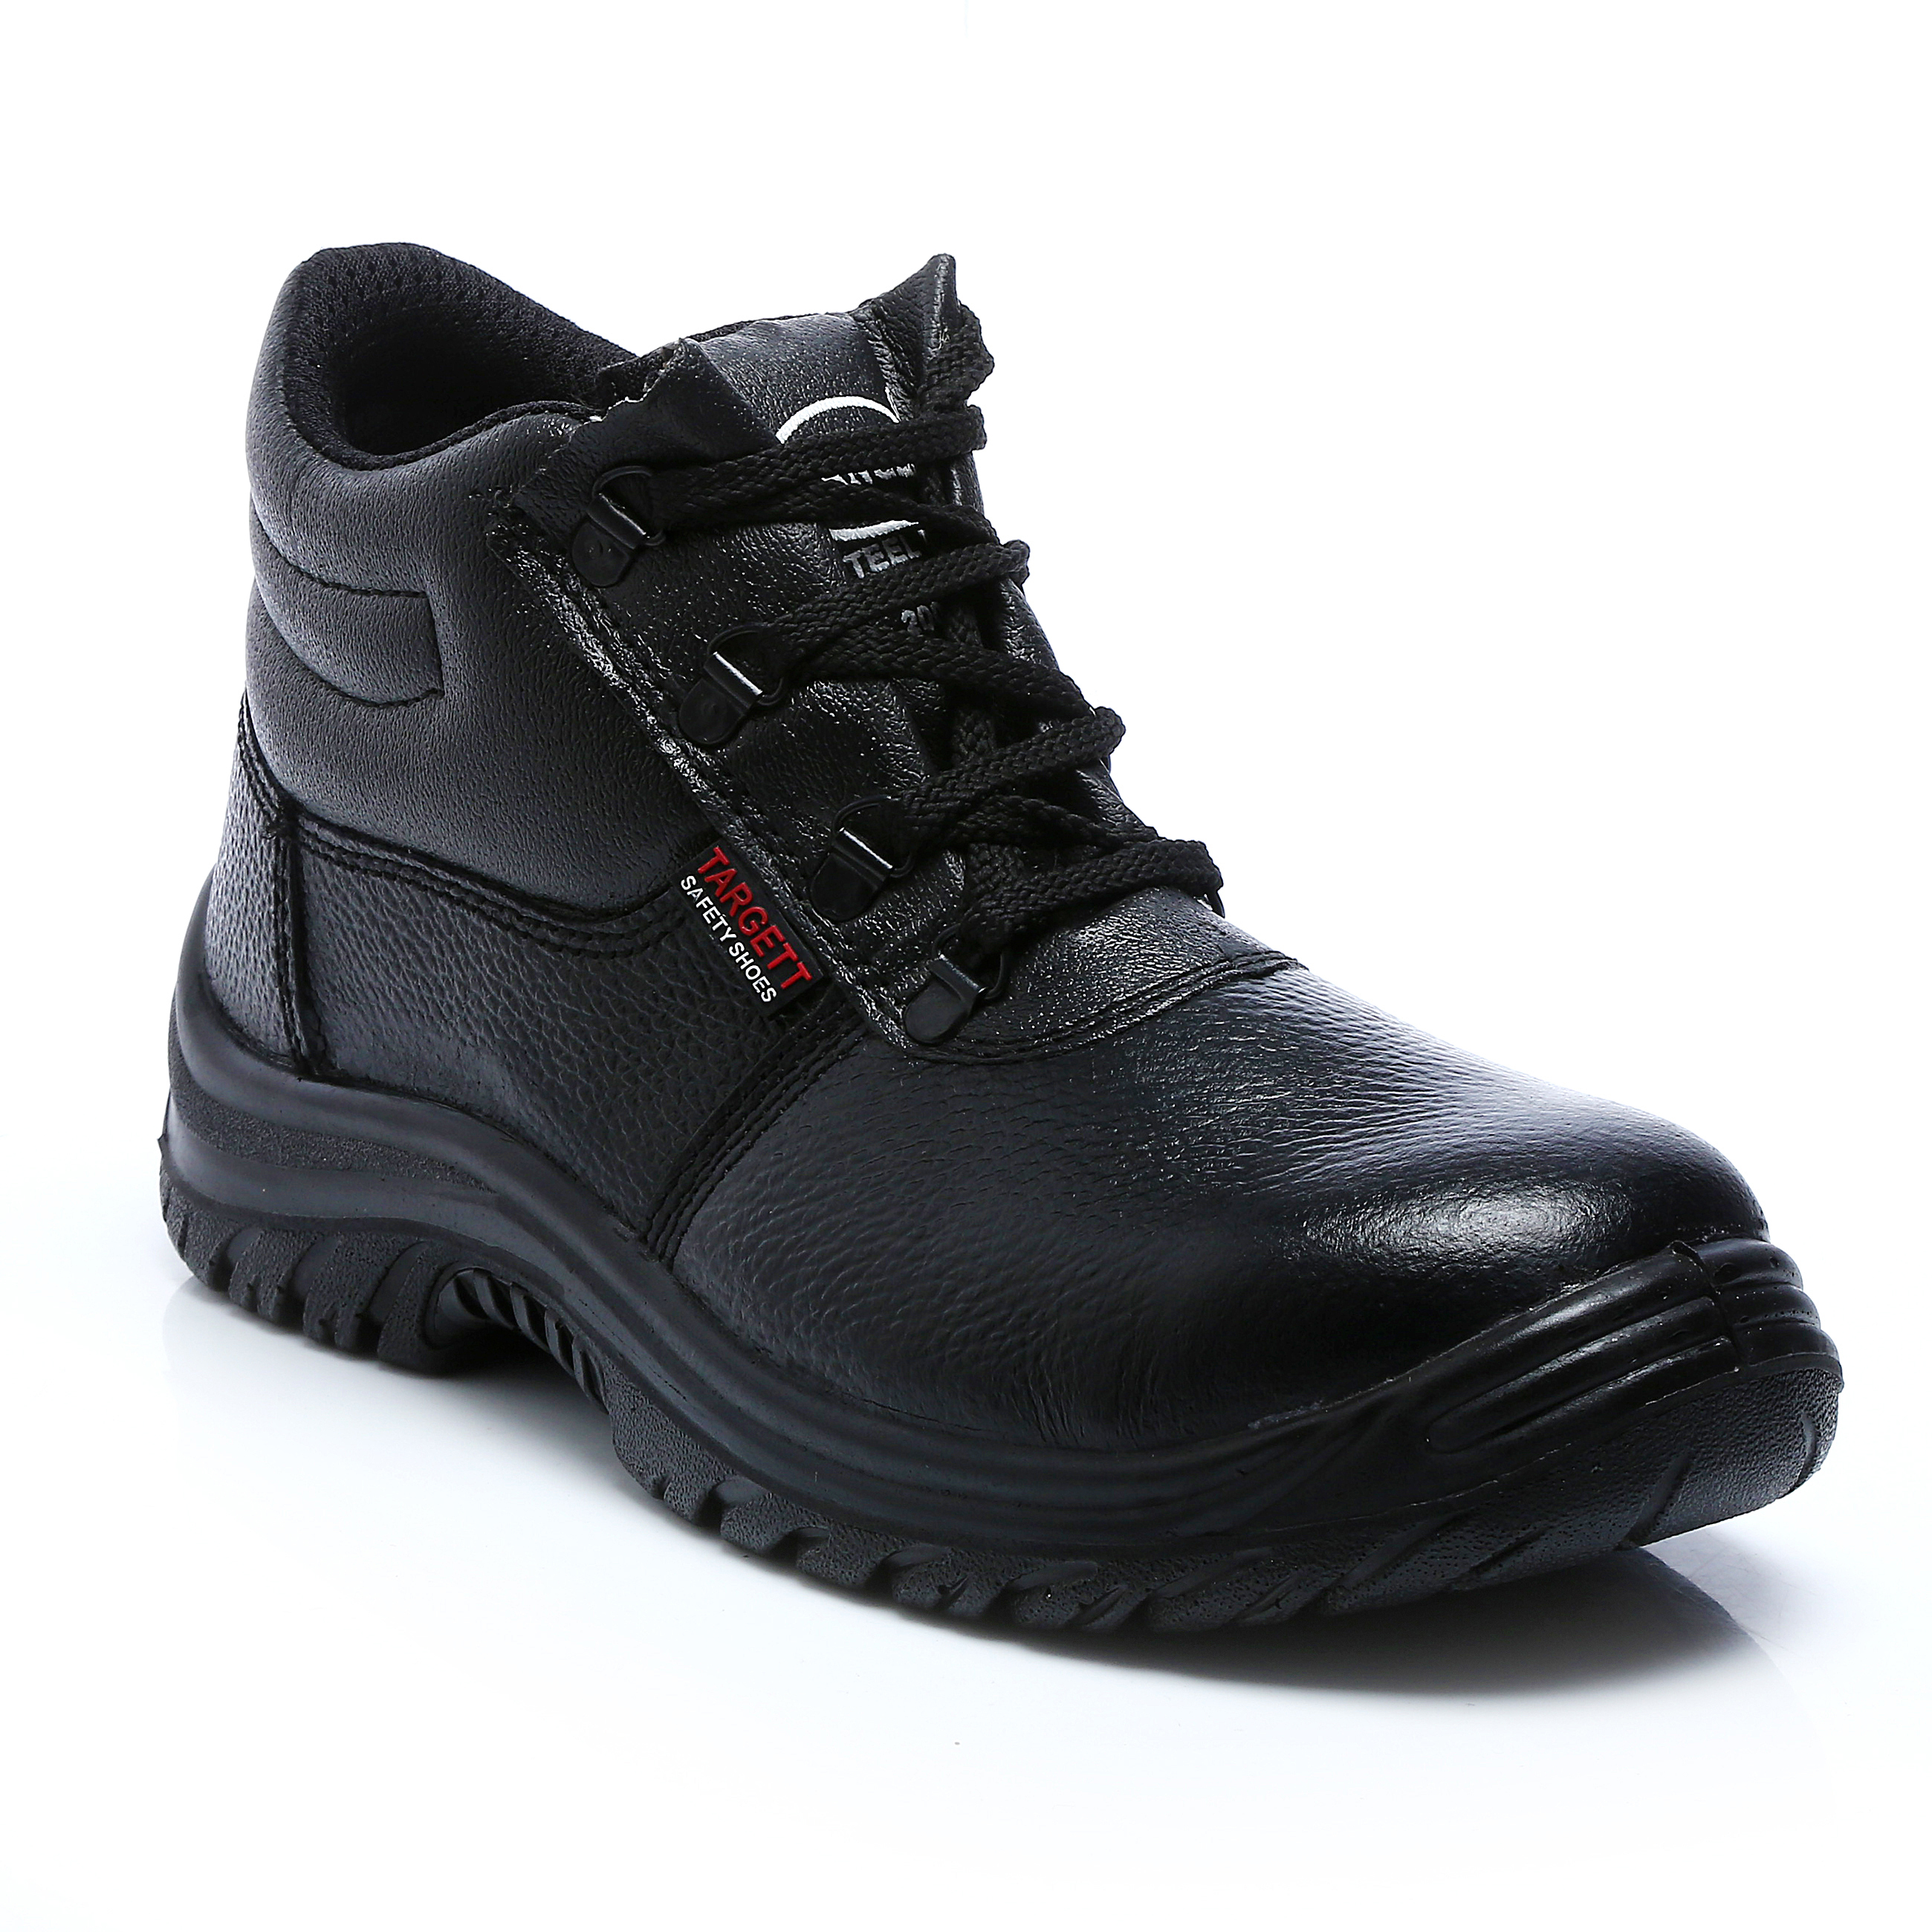 Grain Leather Safety Shoes